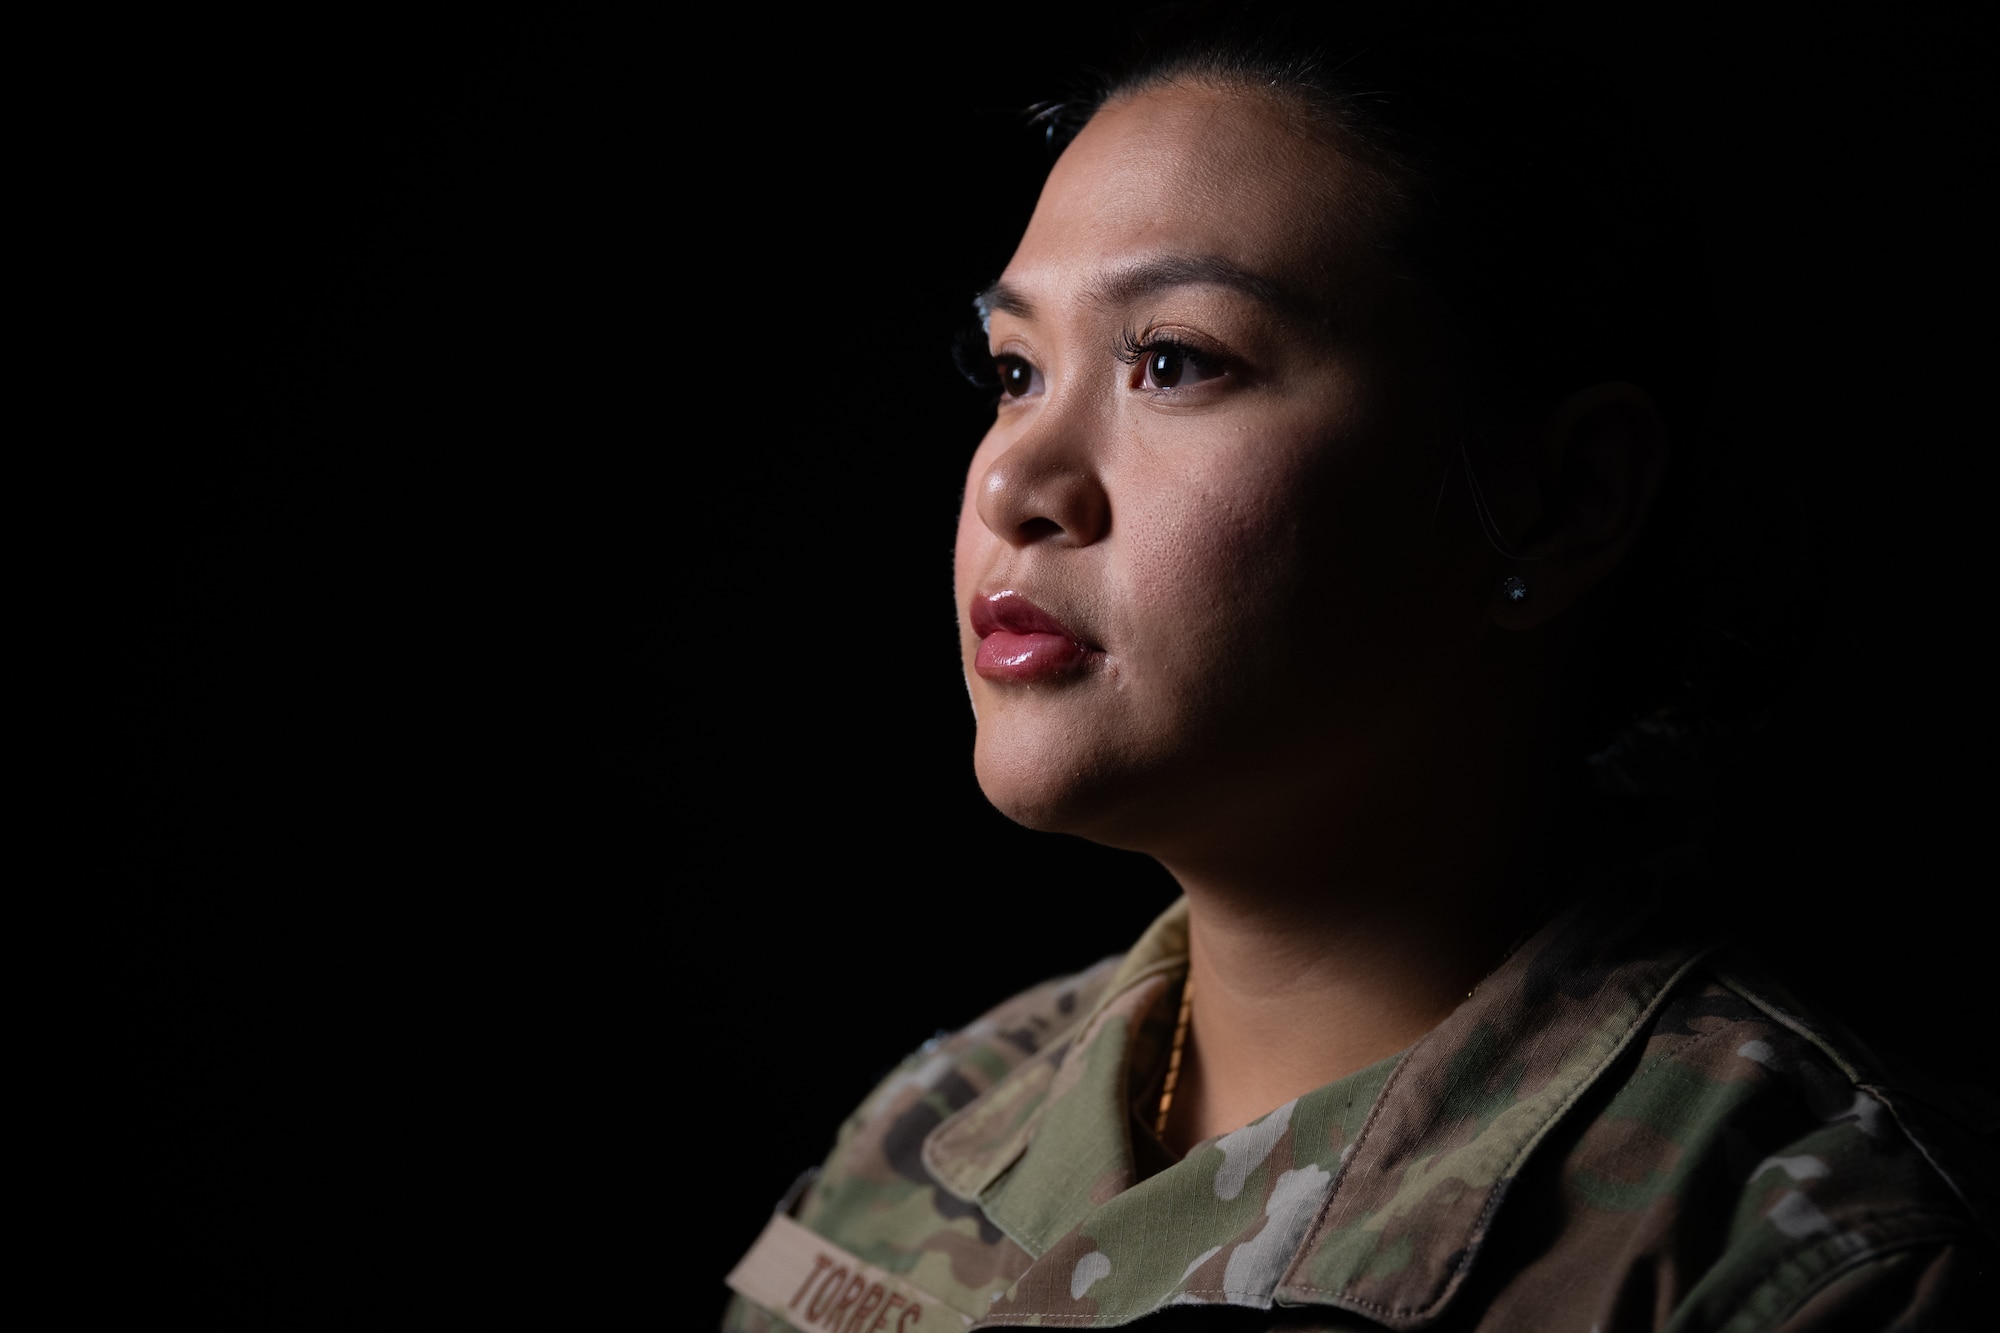 U.S. Air Force Staff Sgt. Myka Torres, a 1st Special Operations Security Forces Squadron base defense operations center controller, poses for a photo at Hurlburt Field, Florida, Feb. 6, 2024. The Air Force builds multi-capable Airmen through language based programs in order to enhance global communication, foster cultural understanding, and empower personnel with the diverse skills needed to navigate complex international environments and missions. (U.S. Air Force photo by Senior Airman Alysa Calvarese)